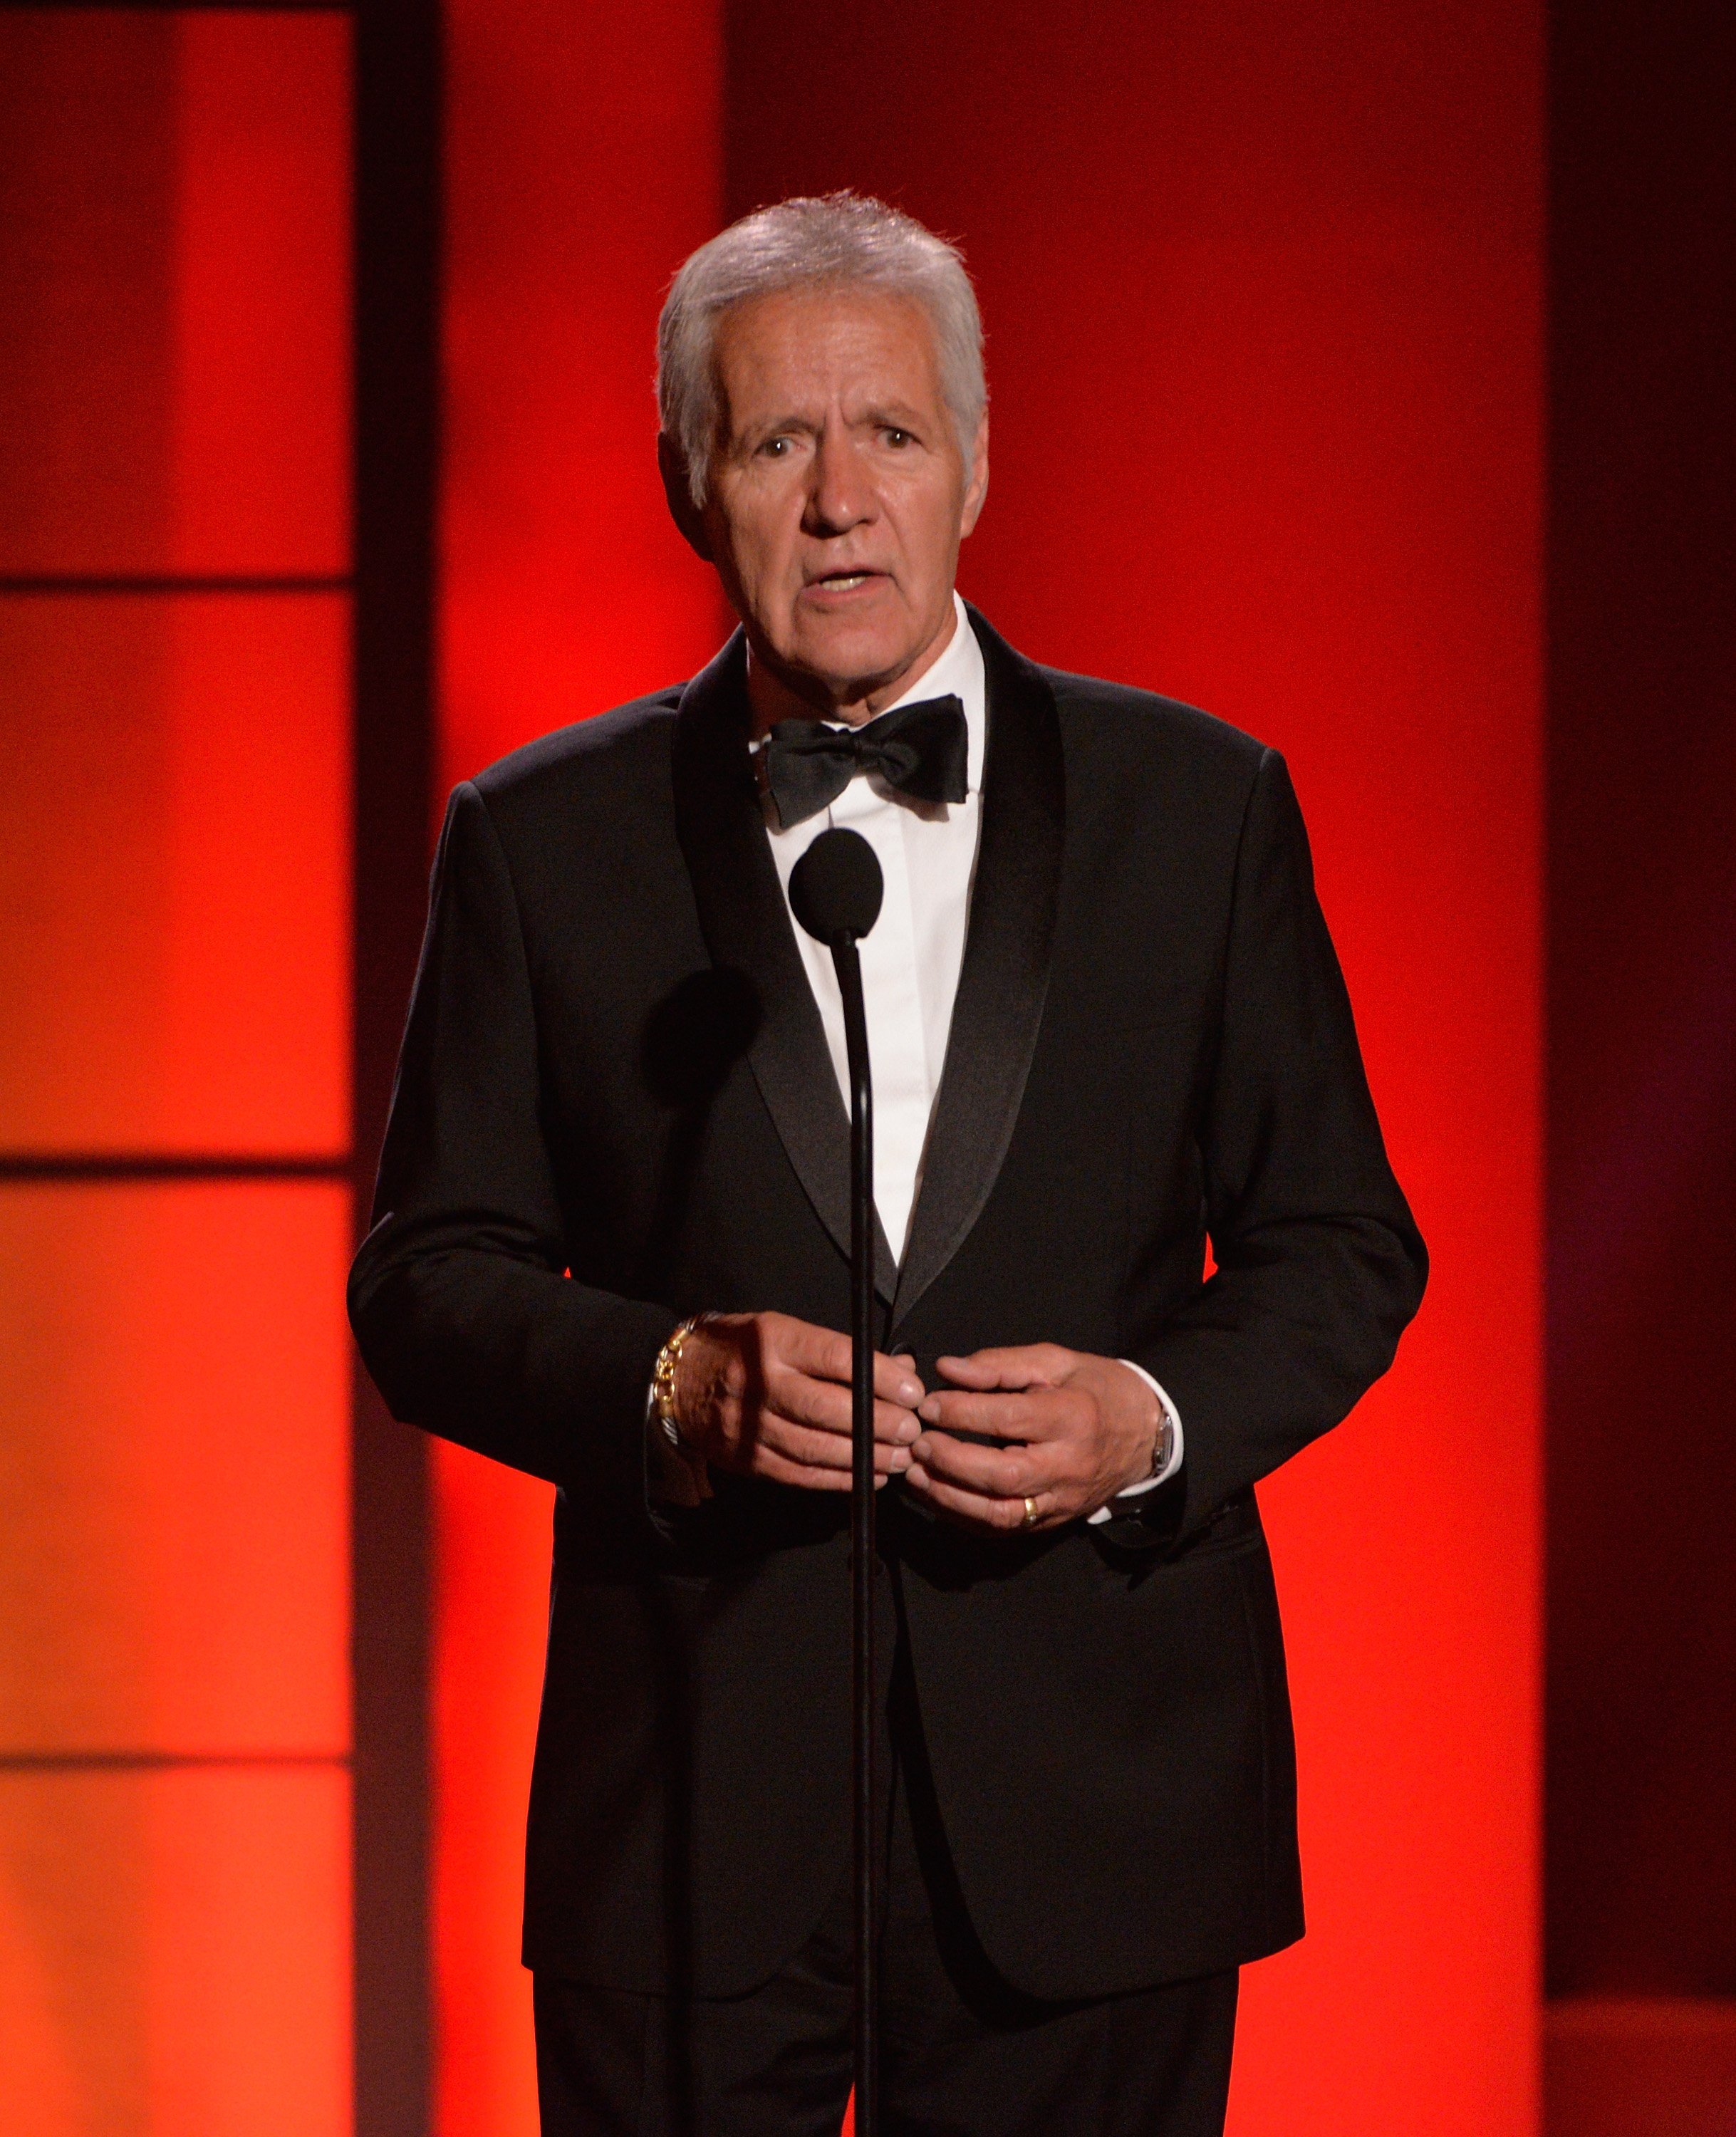 Alex Trebek delivering a speech at the 44th annual Daytime Emmy Awards in Pasadena, California | Photo: Getty Images